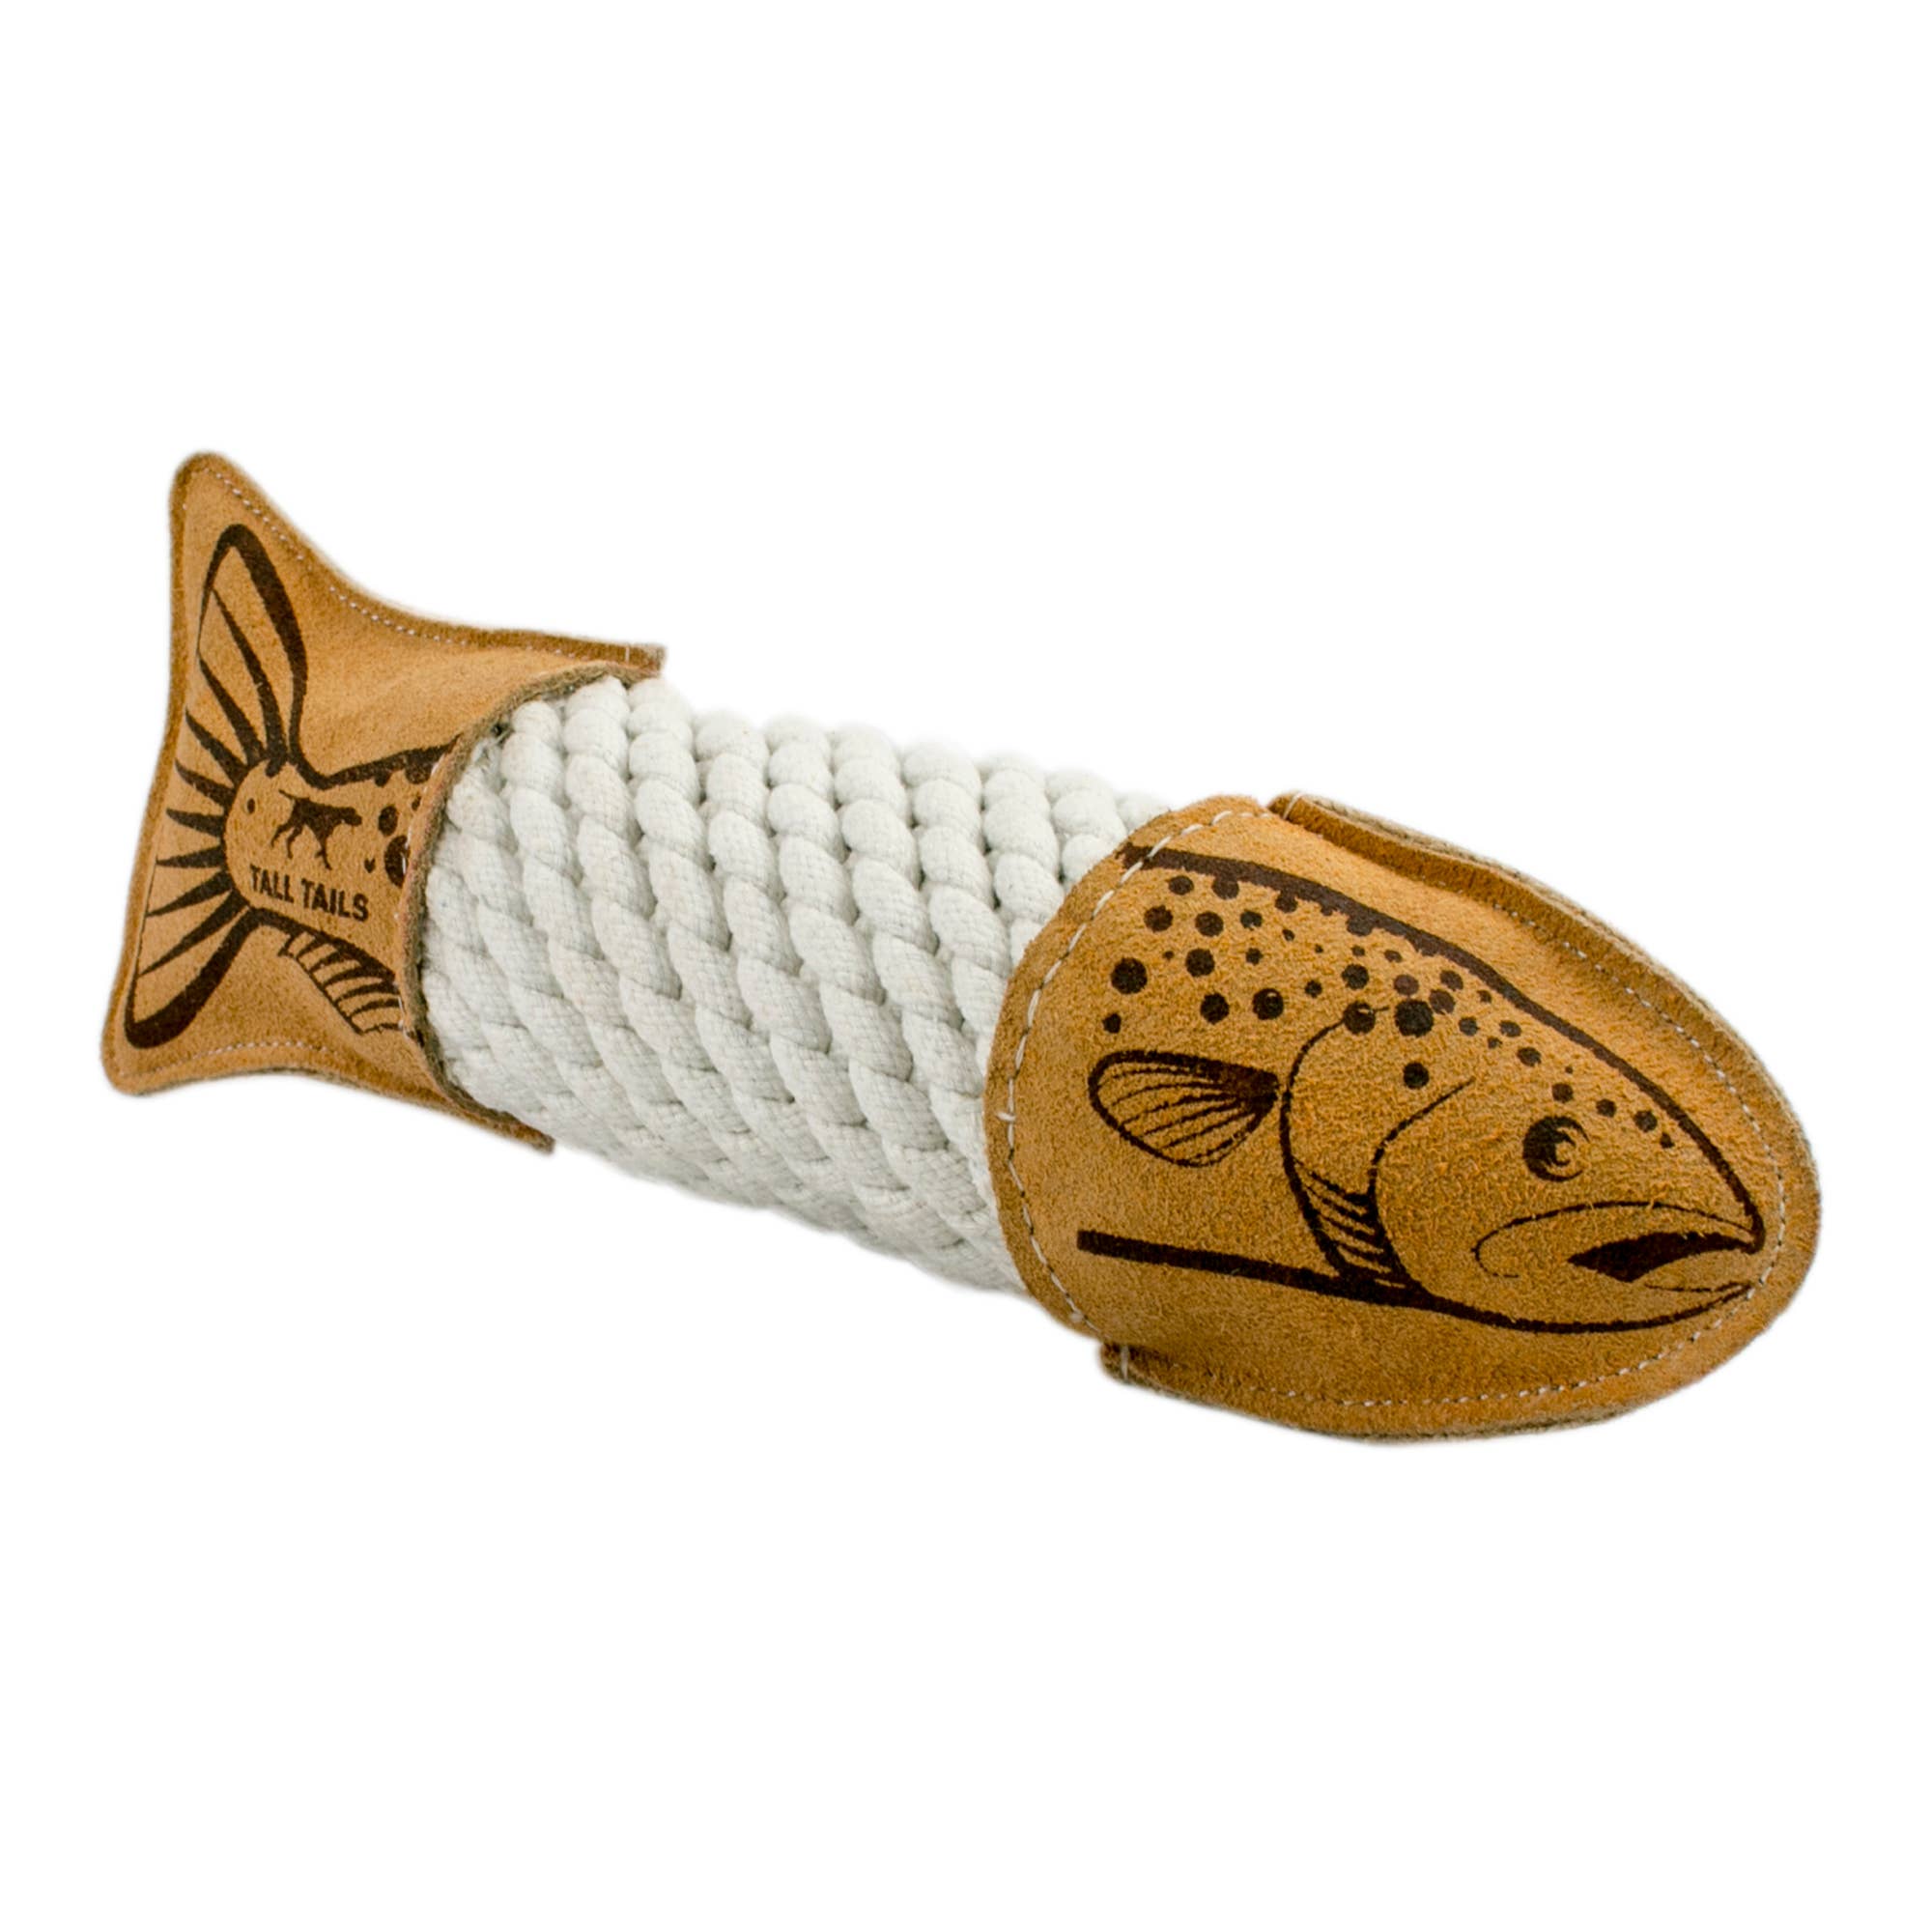 Tall Tails - 15" Natural Leather Trout Rope Tug Dog Toy